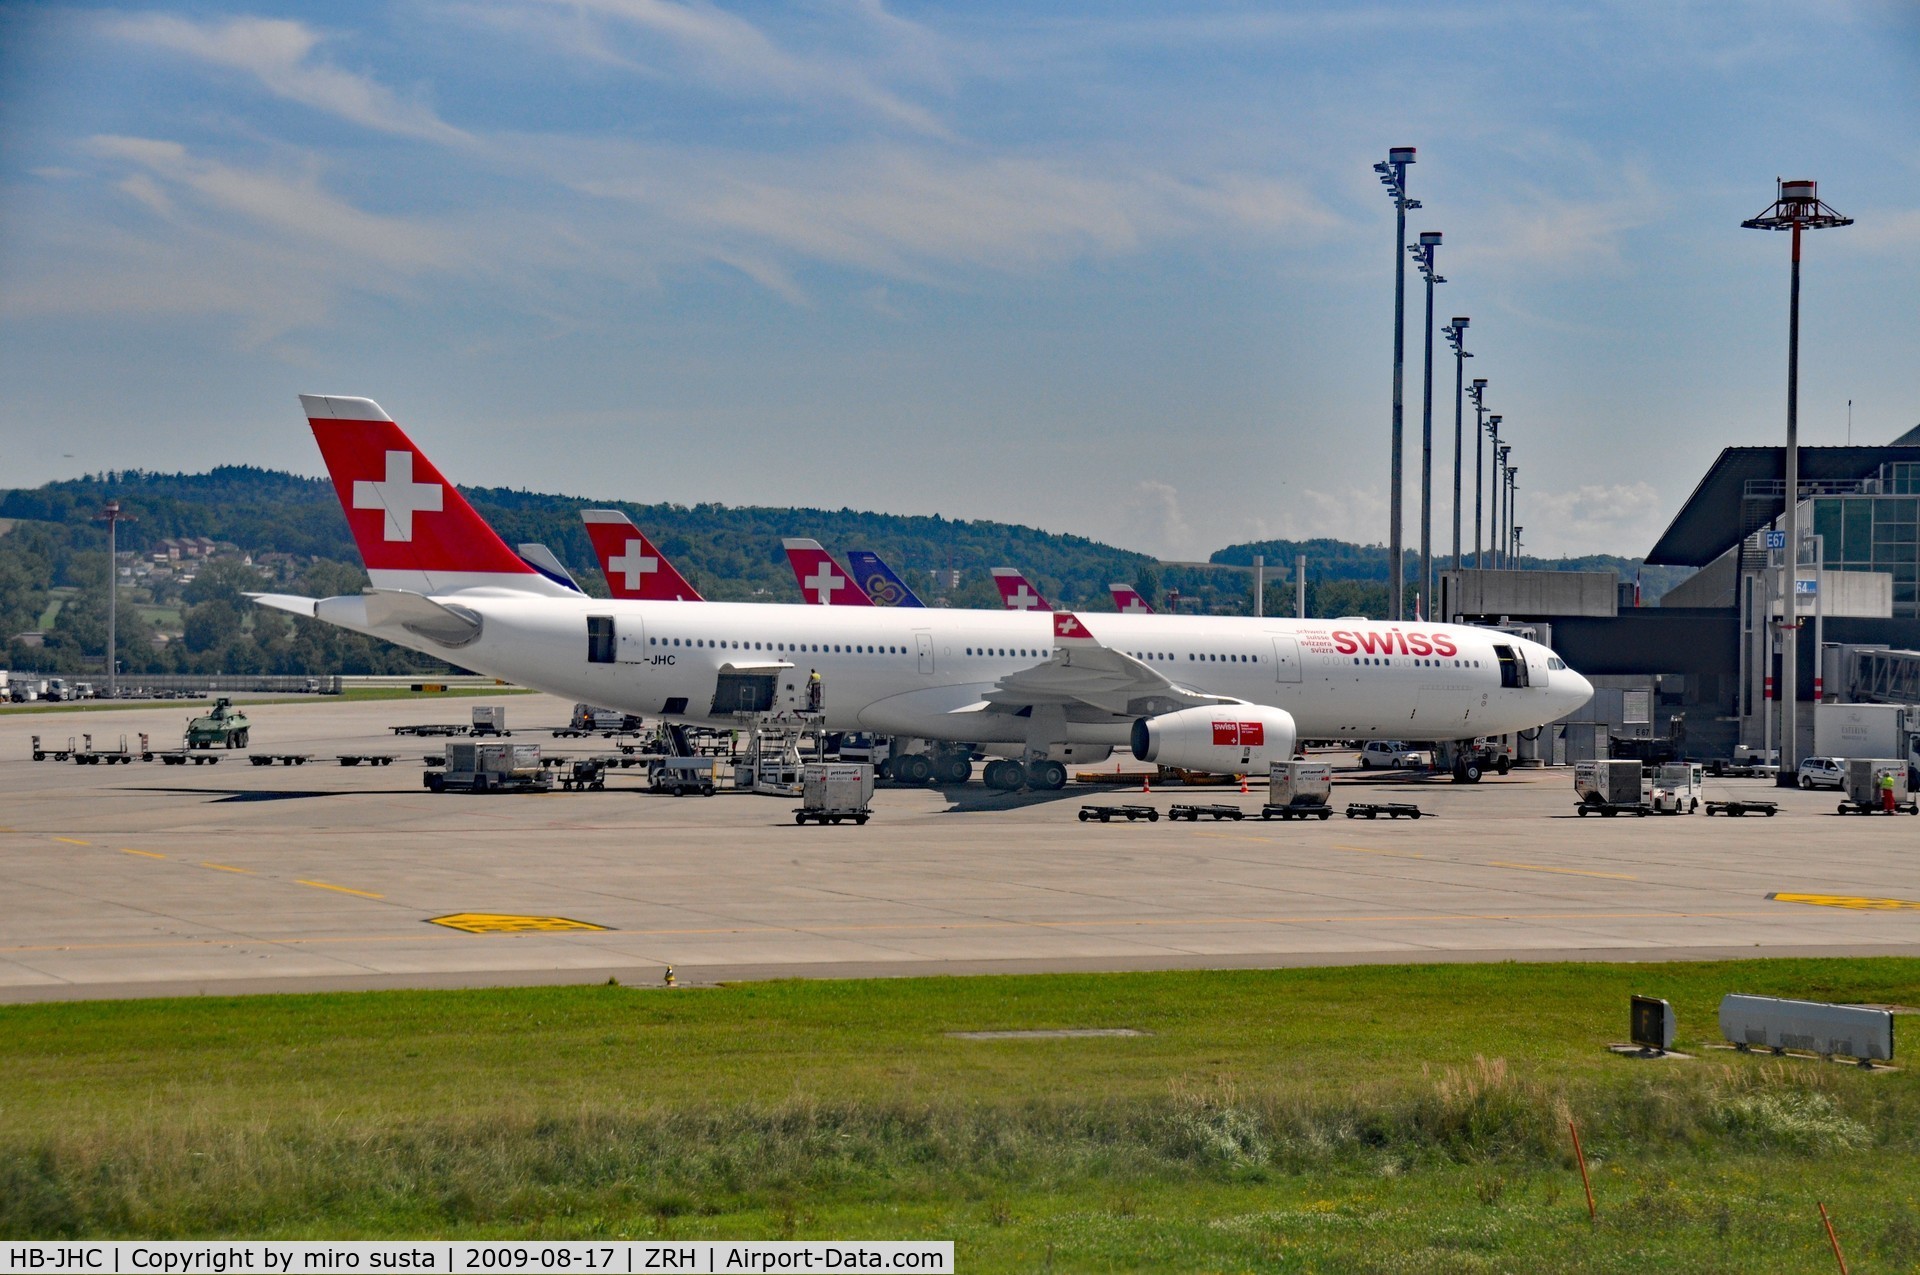 HB-JHC, 2009 Airbus A330-343X C/N 1029, Swiss International Airlines Airbus A330-343 Airplane, Zurich